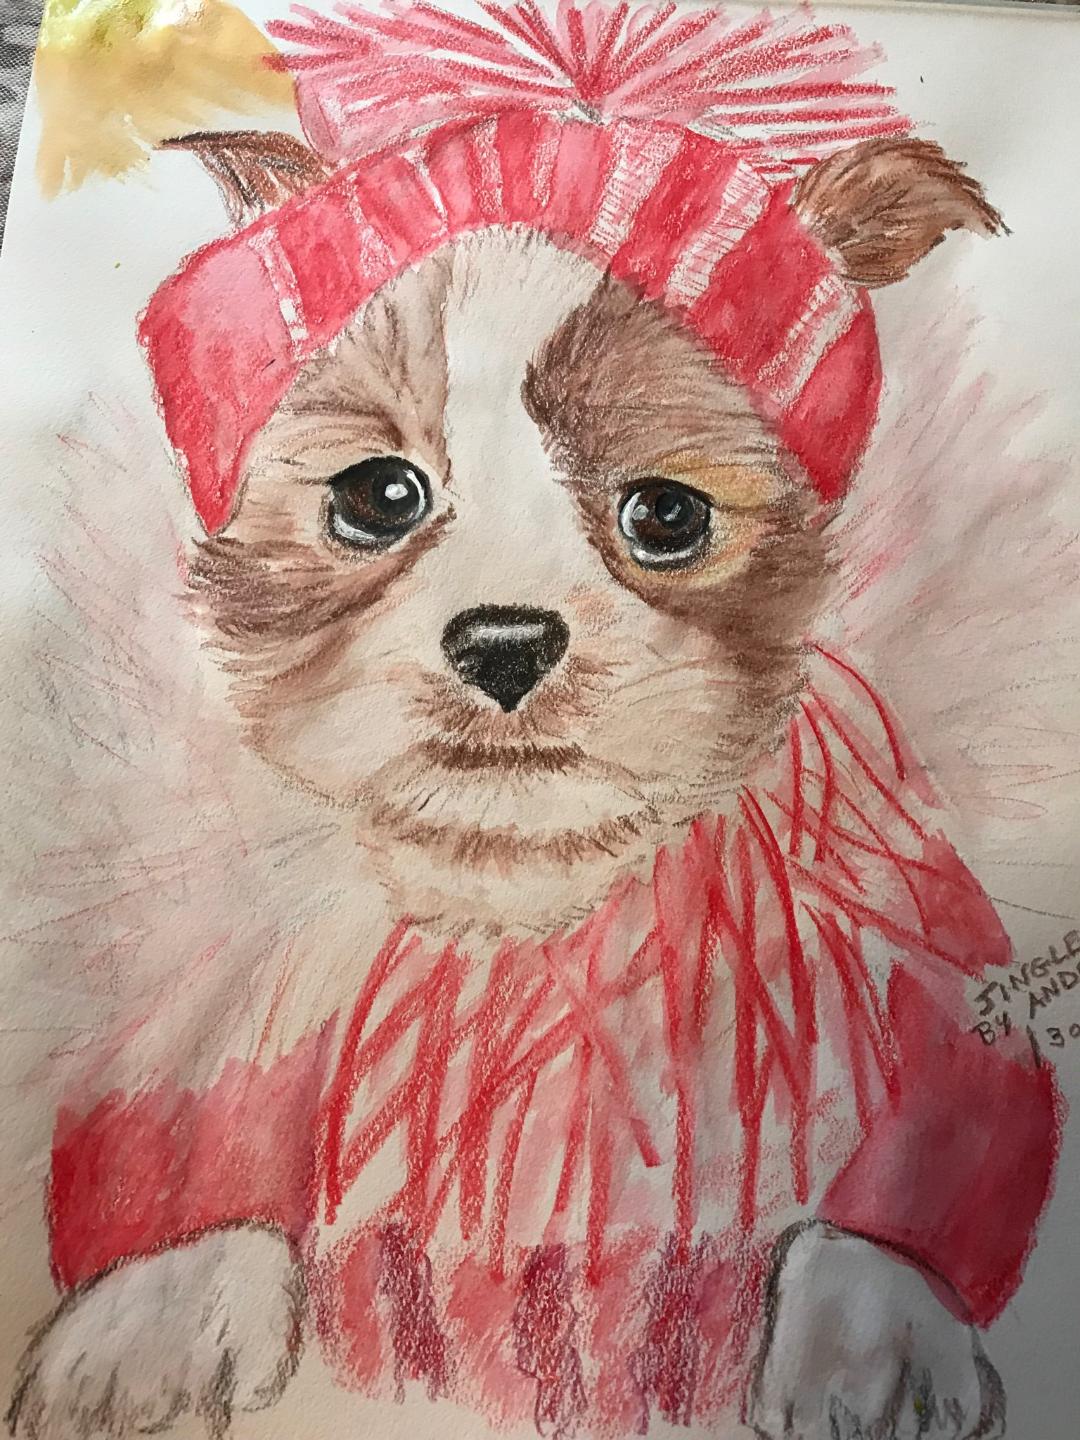 Portrait of pet puppy with Christmas hat by Grammy Puppy. Copyright 2020 by Andrea Buto, and all rights reserved.